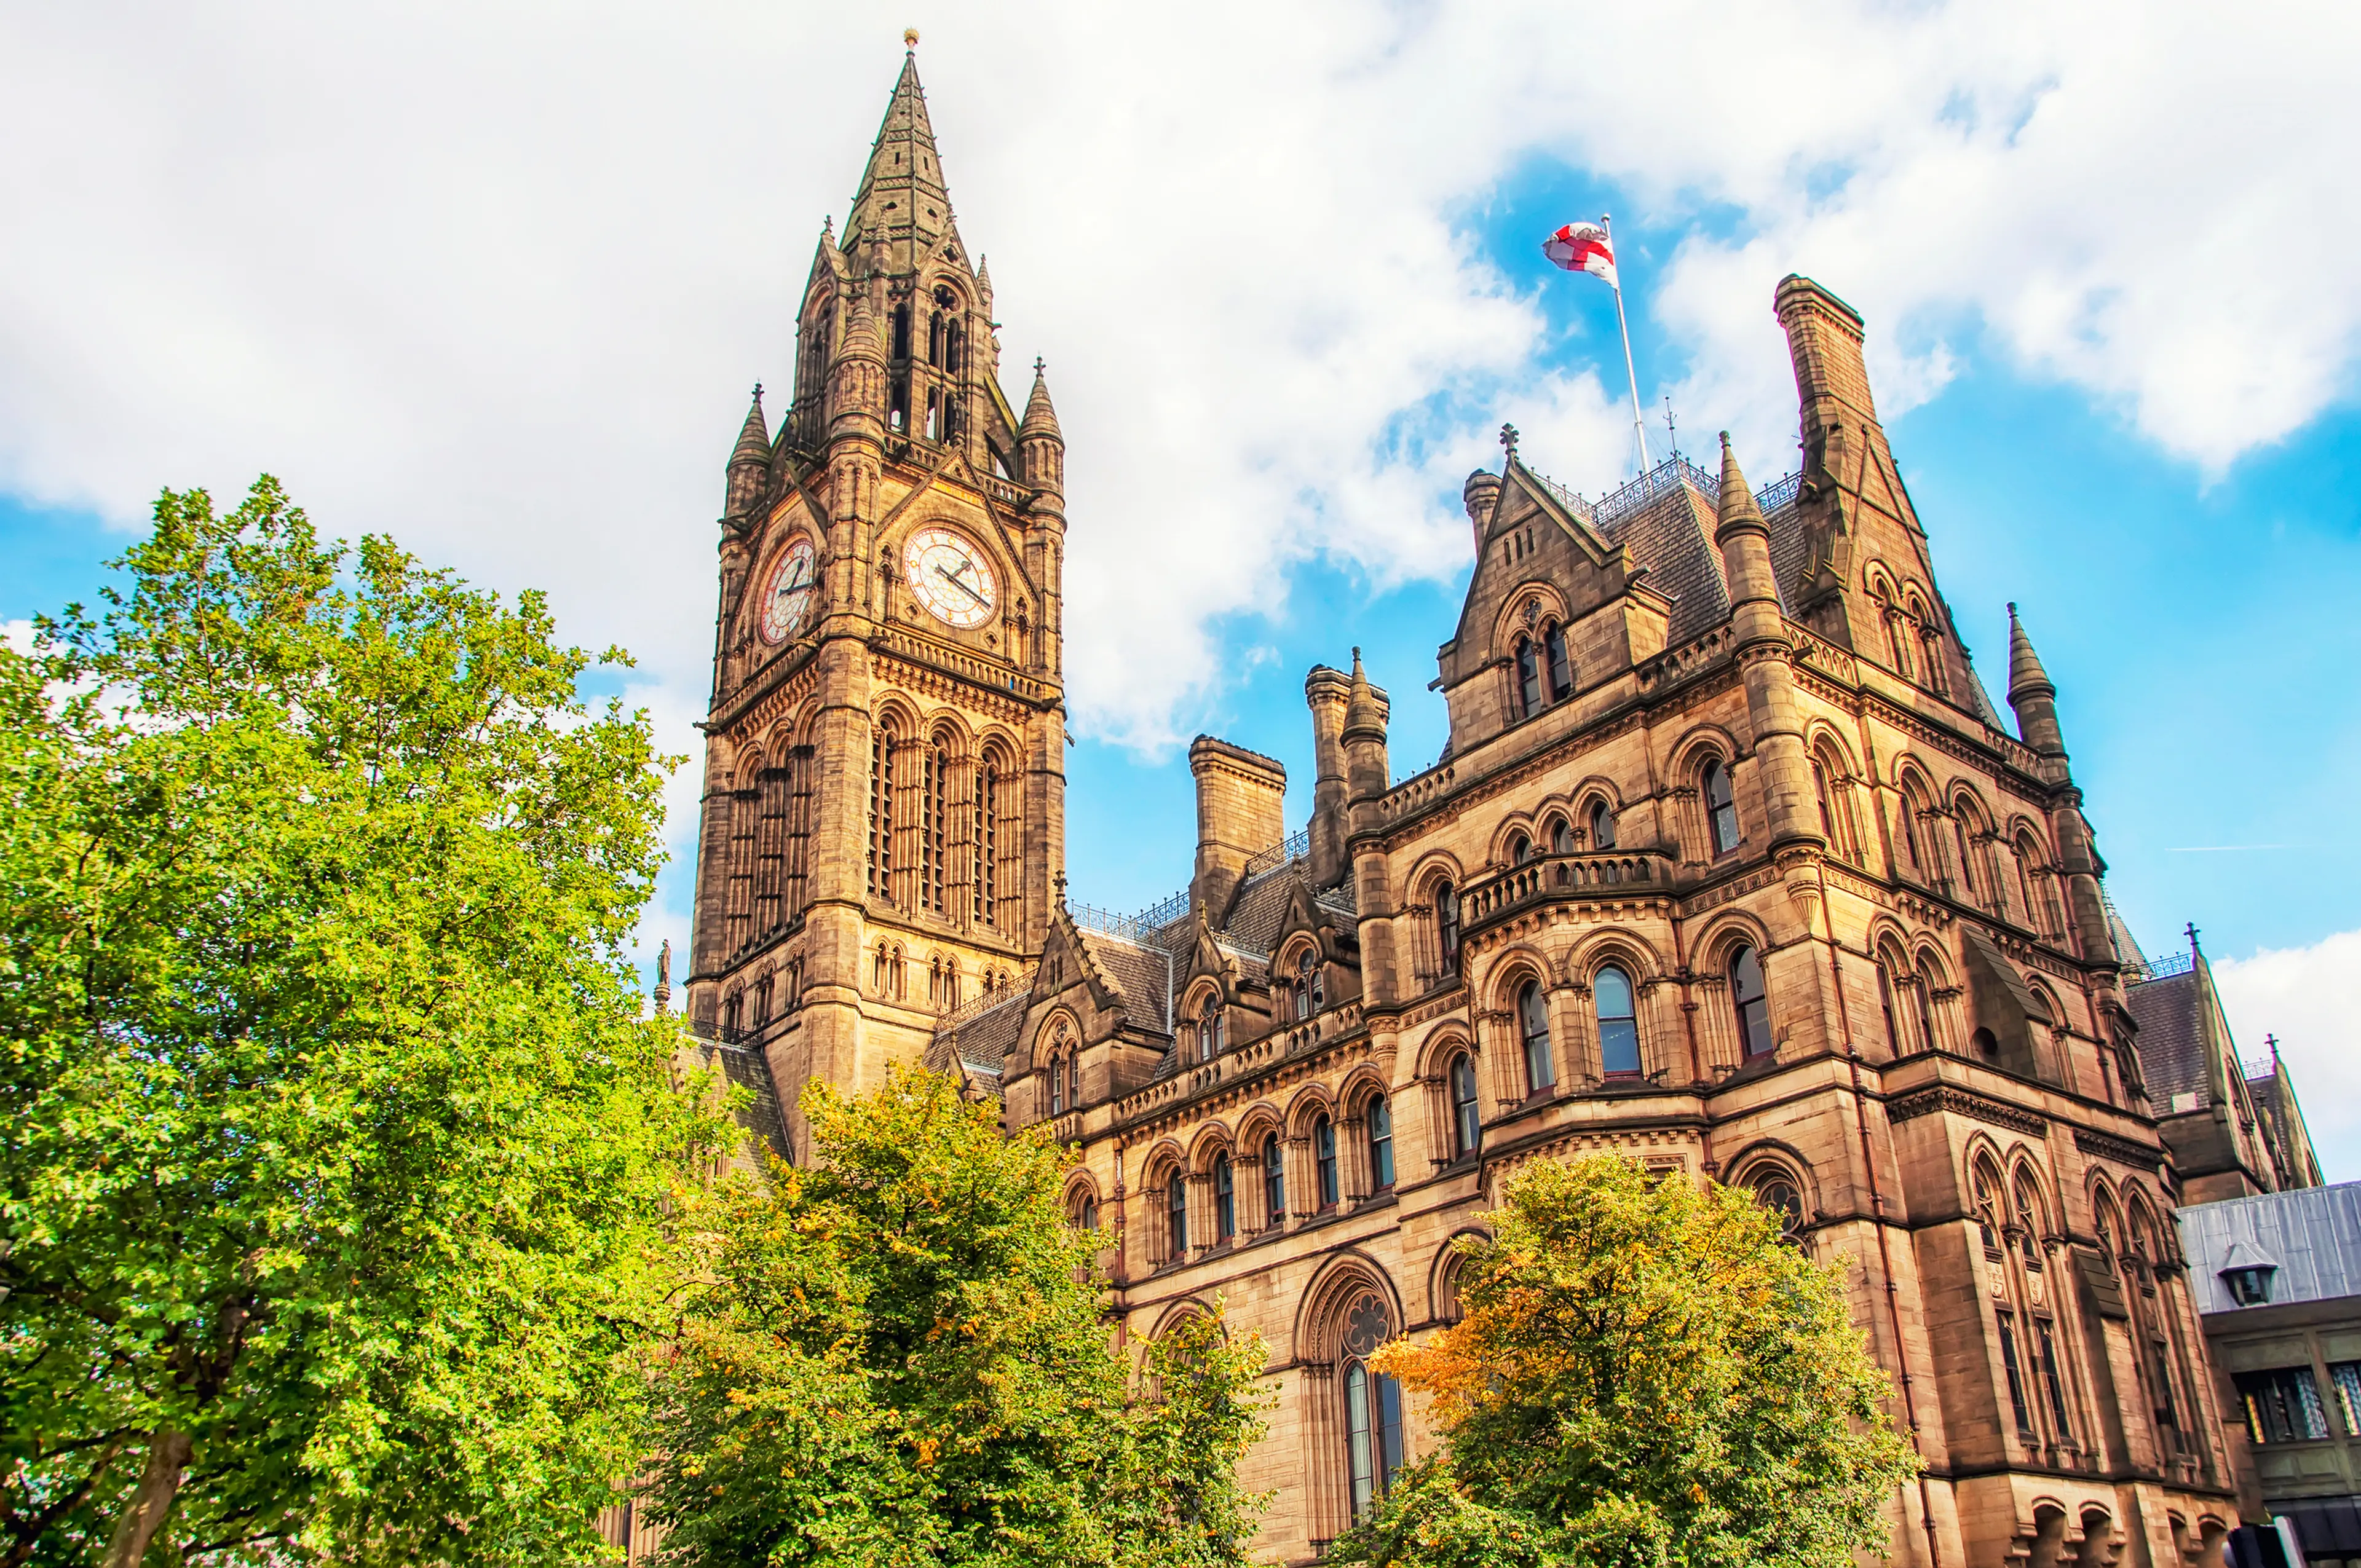 3-Day Excursion Guide to Manchester, England